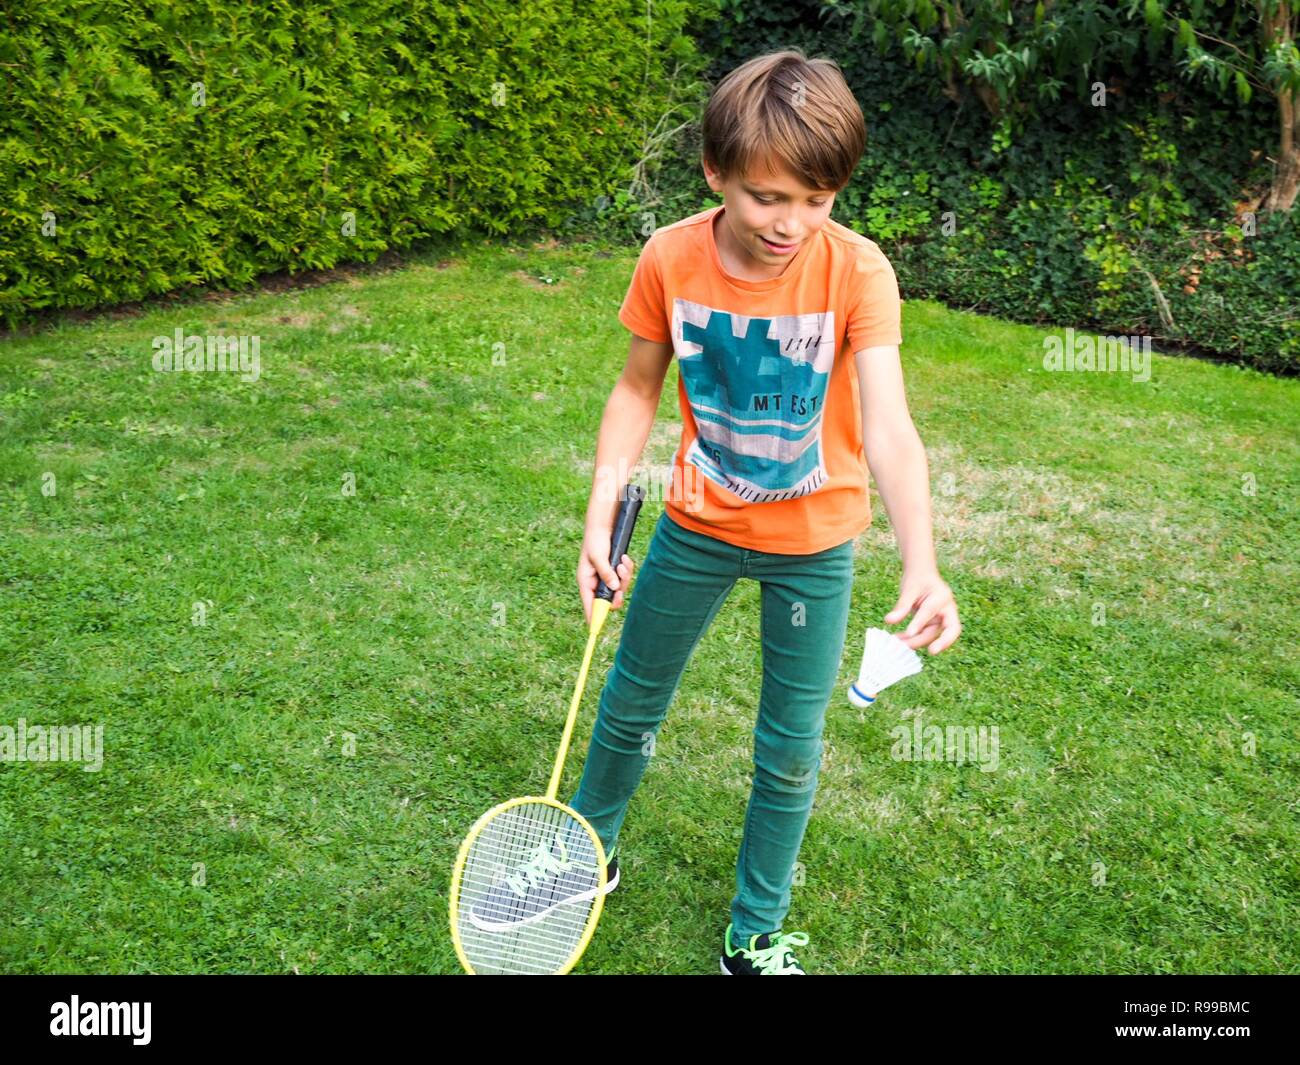 Young boy playing badminton, about to serve the shuttle Stock Photo